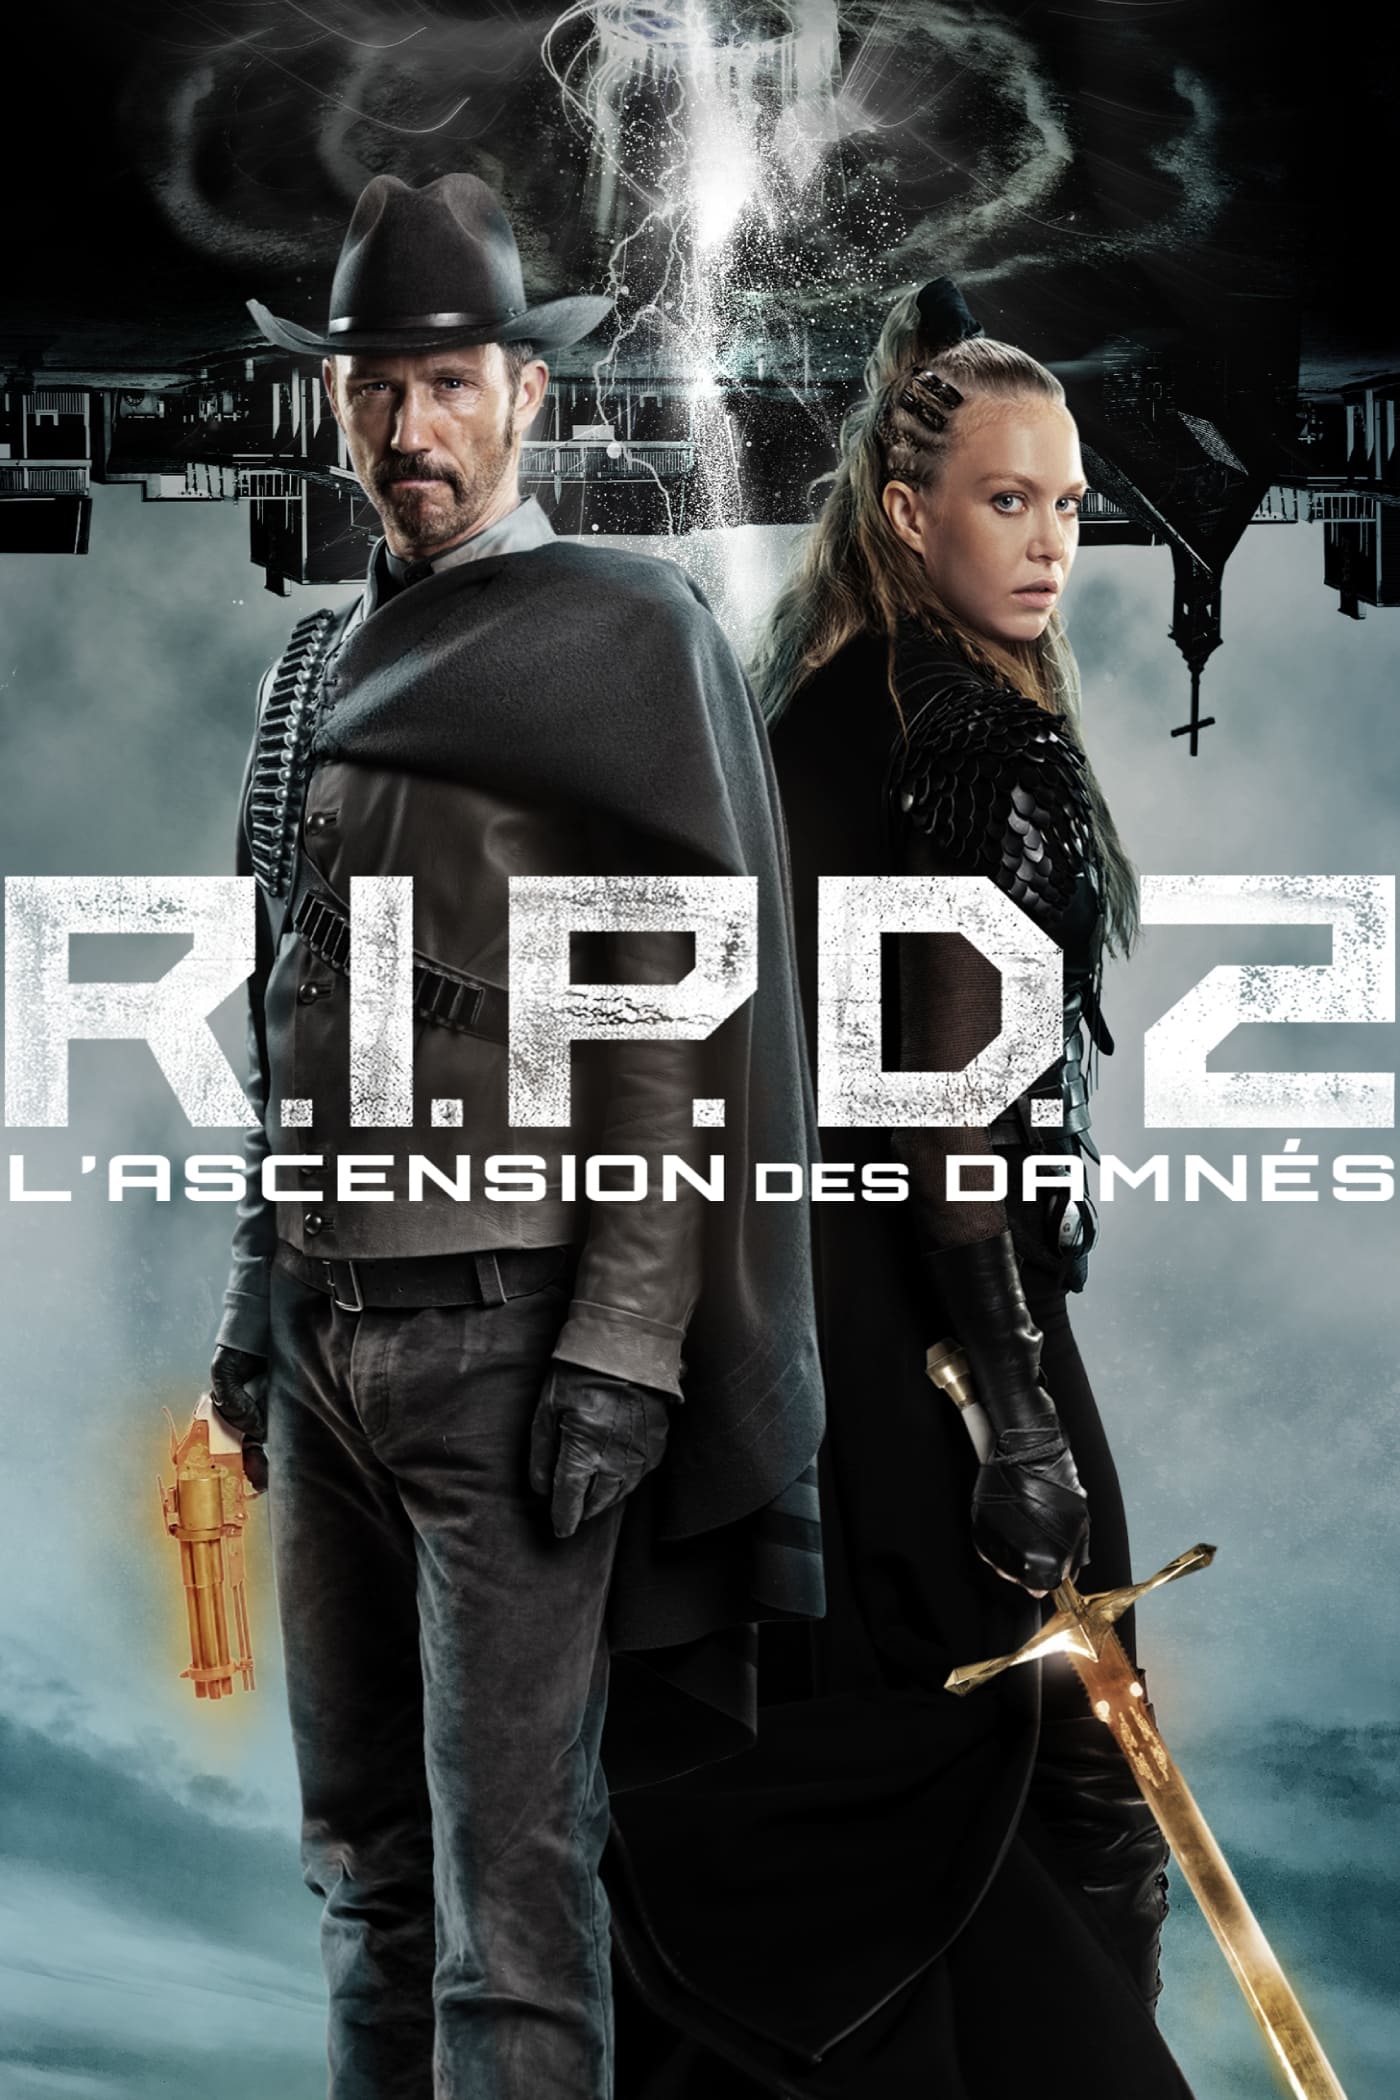 R.I.P.D. 2 : Rise of the Damned